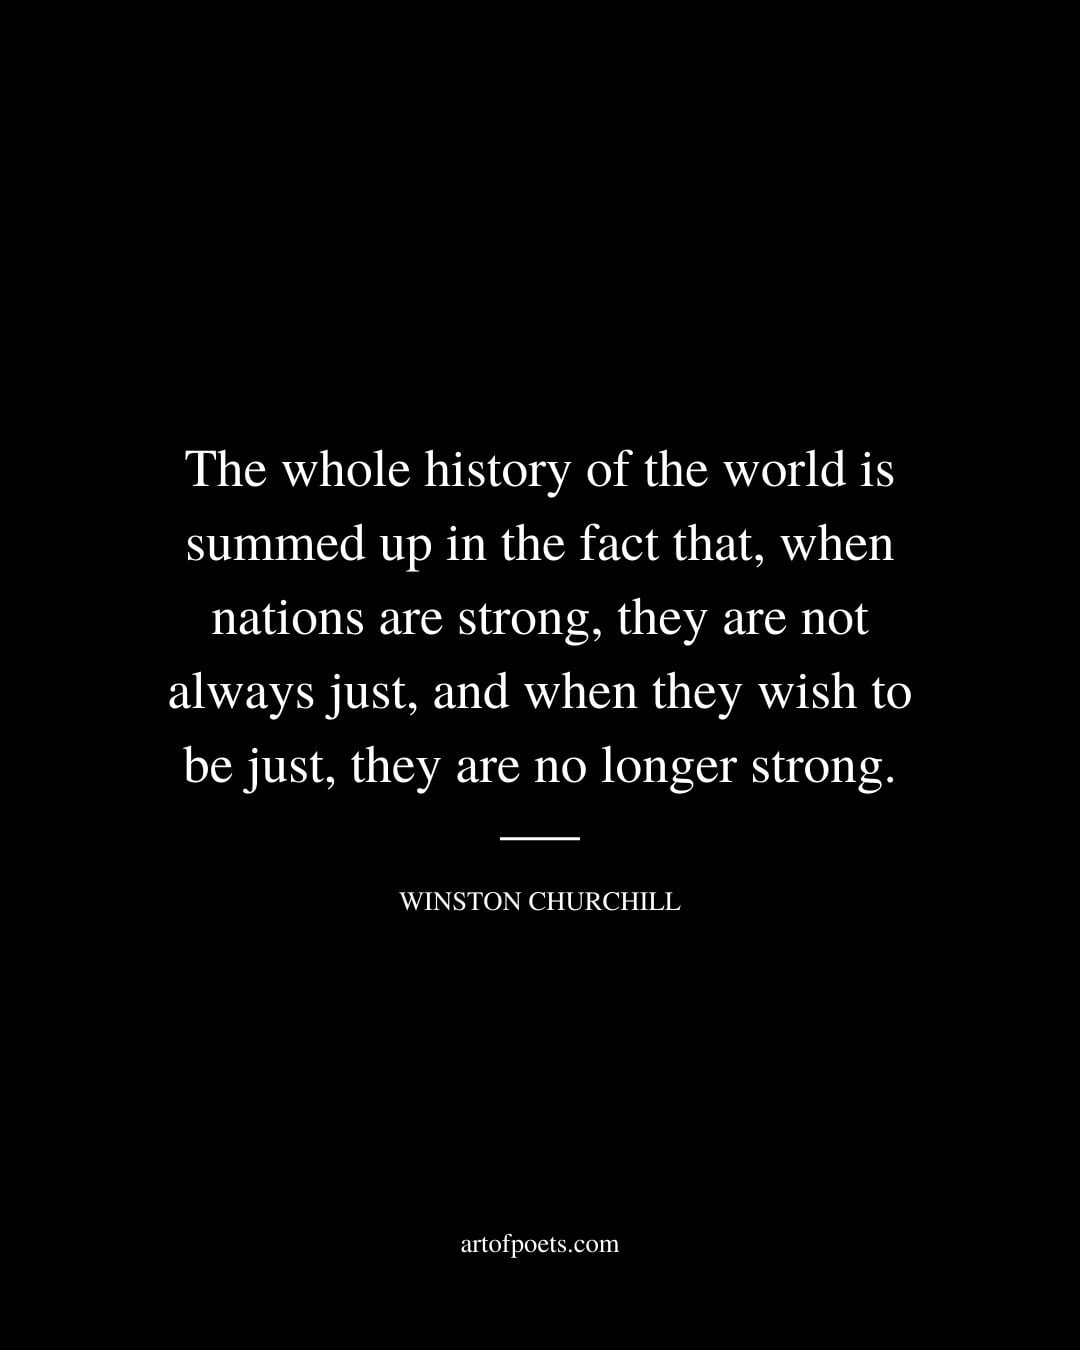 The whole history of the world is summed up in the fact that when nations are strong they